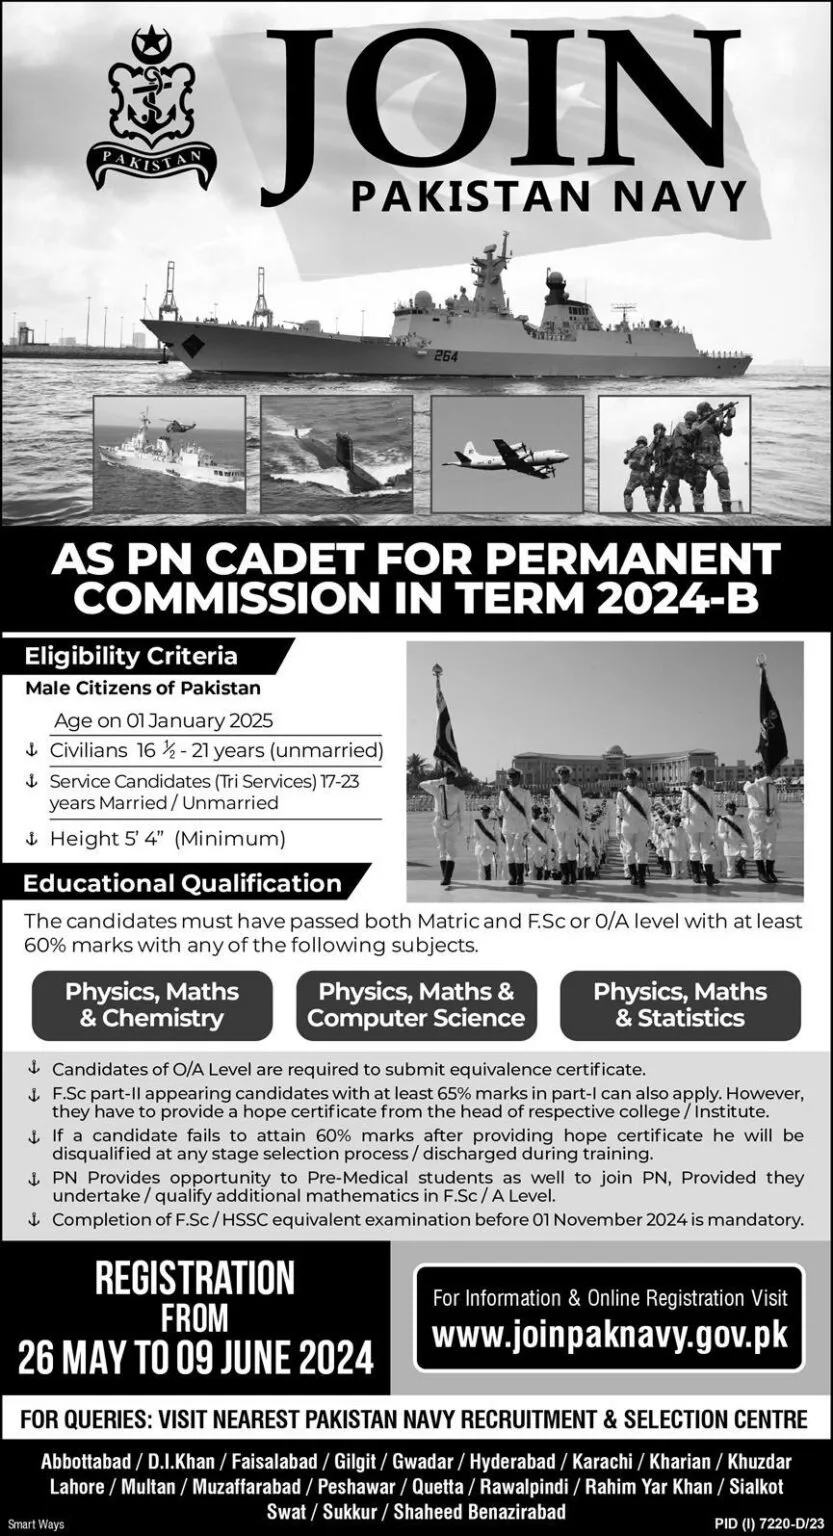 Join Pakistan Navy as PN Cadet for Permanent Commission in Term 2024-B